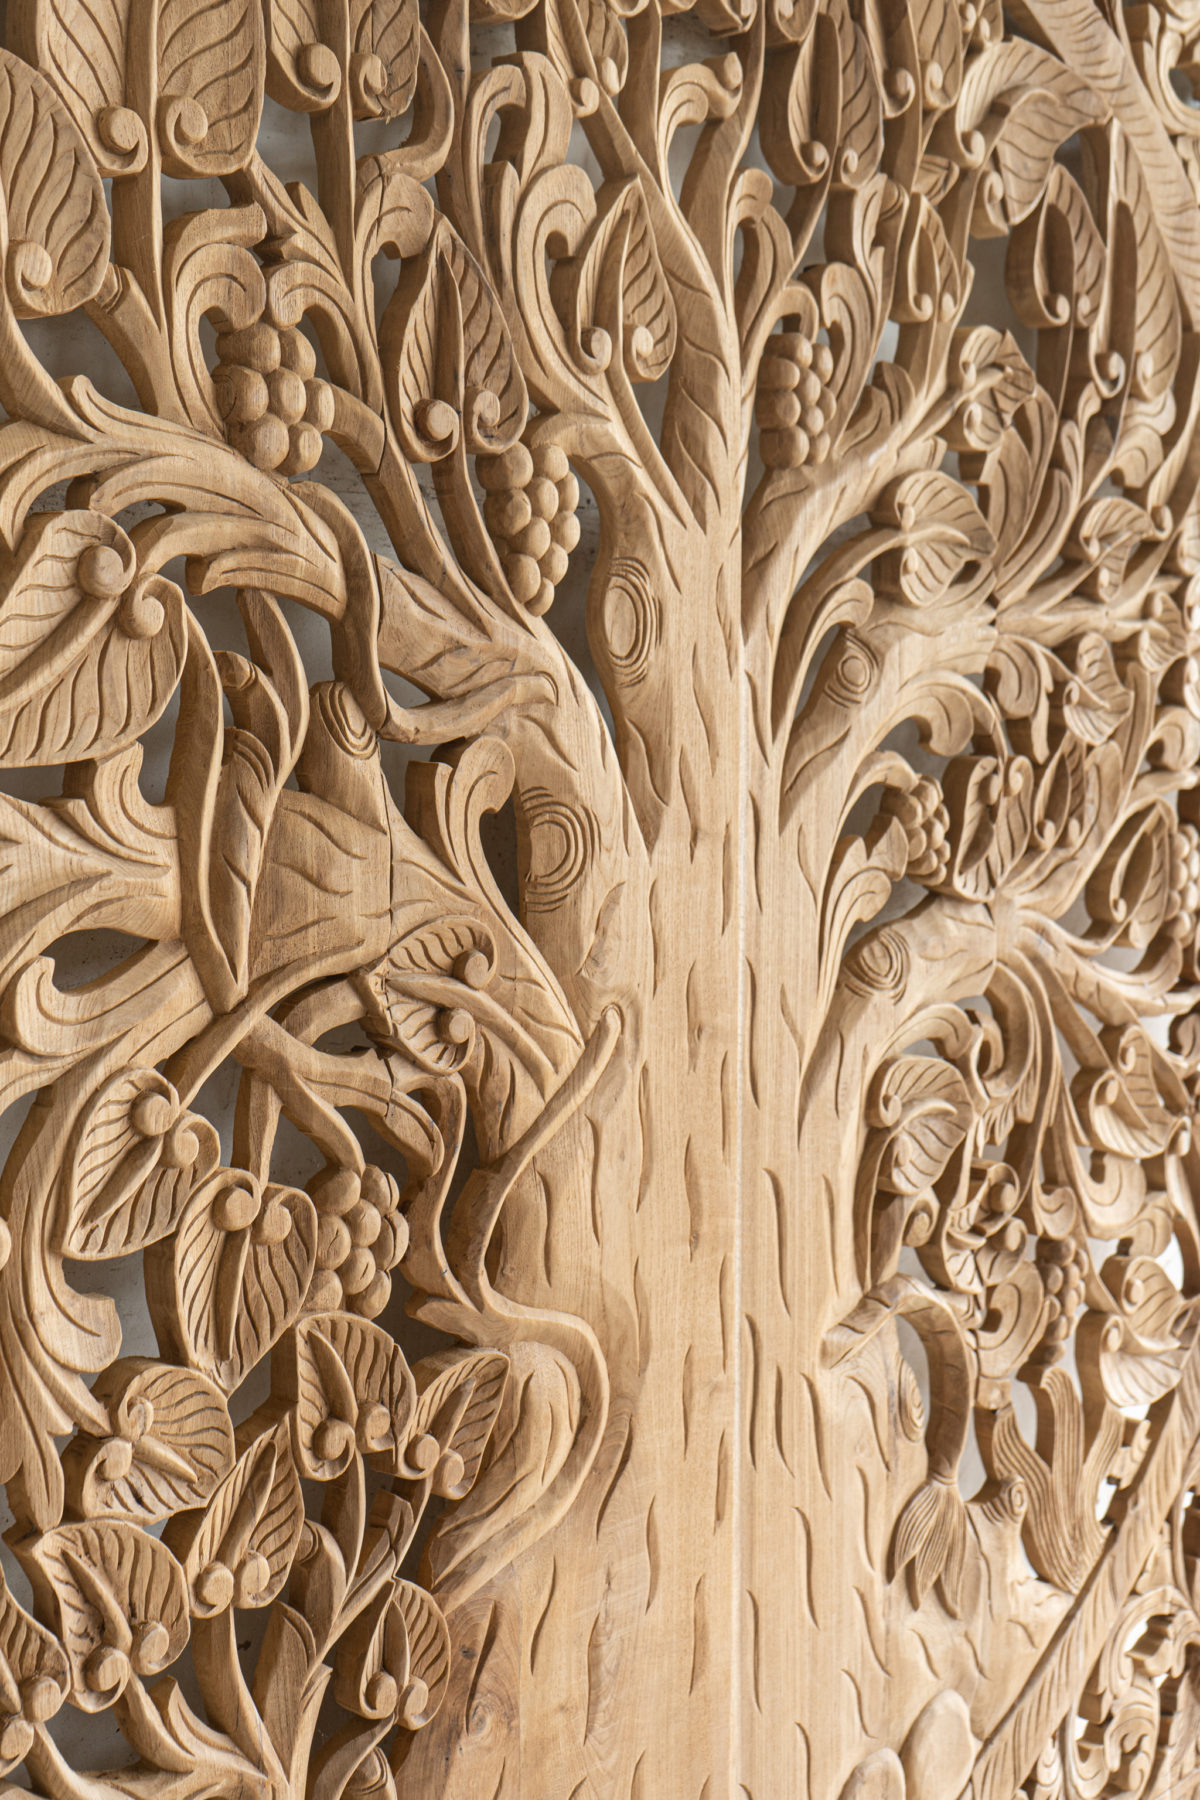 Hand carved wooden panels from thailand